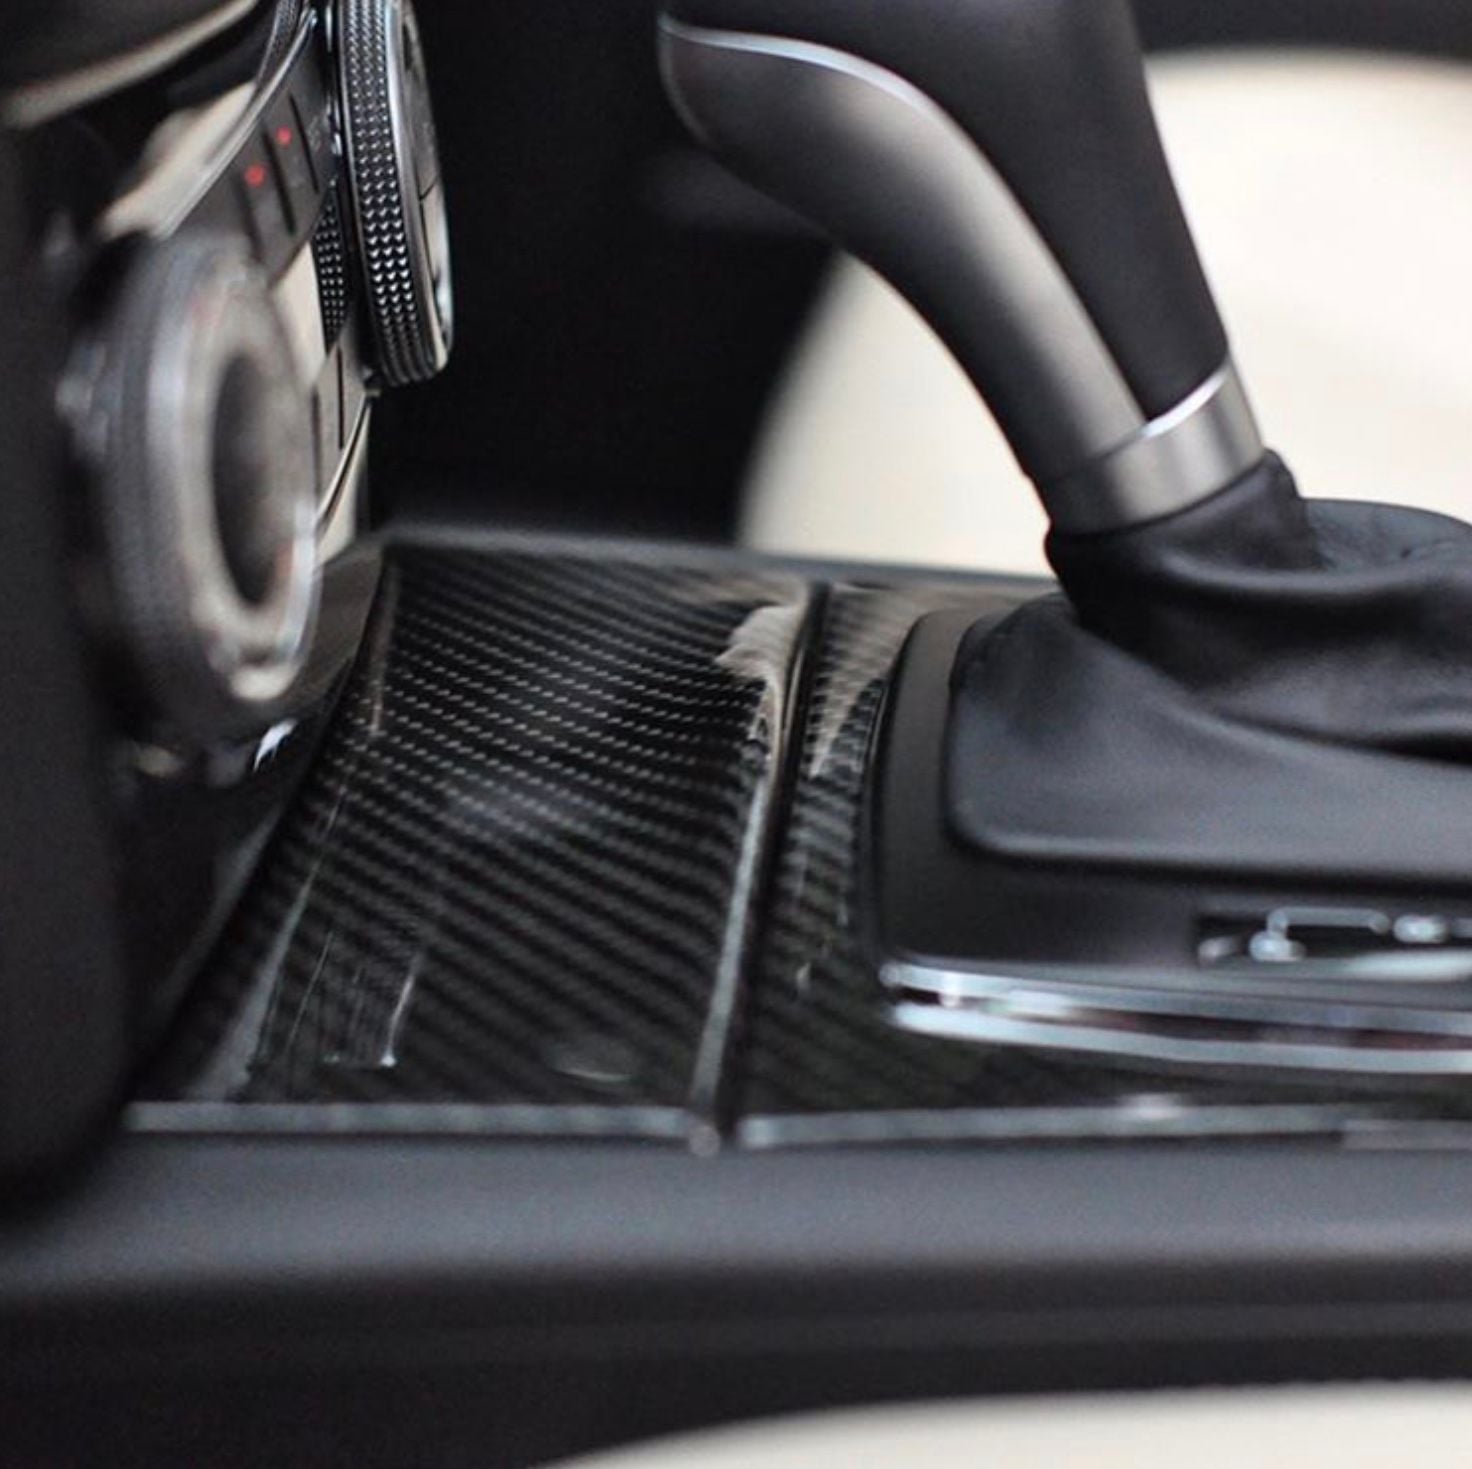 Interior/Upholstery - W204 Carbon Fiber Kit - New - All Years  All Models - East Providence, RI 02914, United States